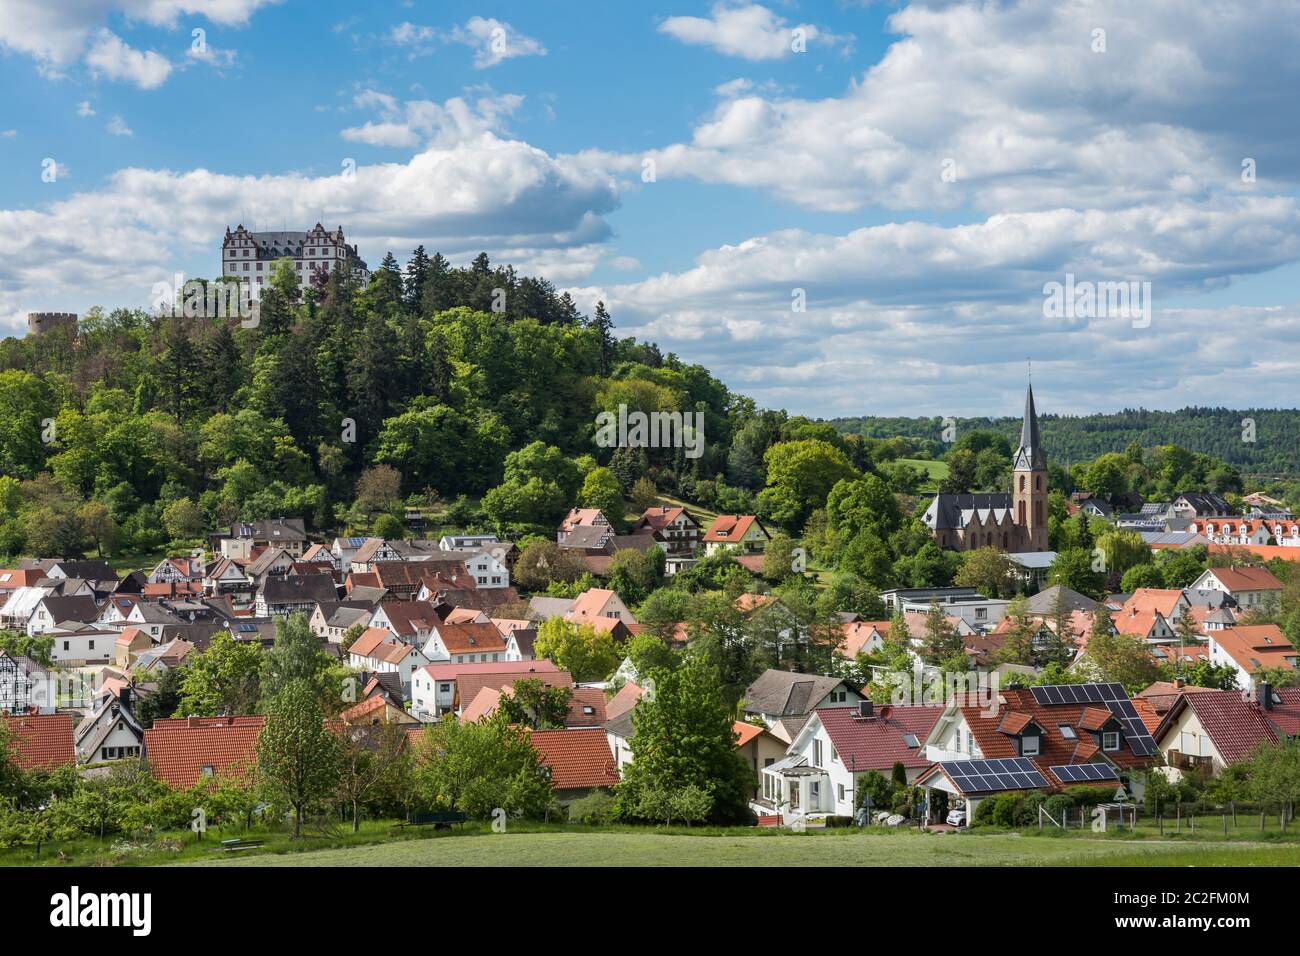 View at Lichtenberg castle in beautiful Fischbachtal, Odenwald, Hesse, Germany Stock Photo